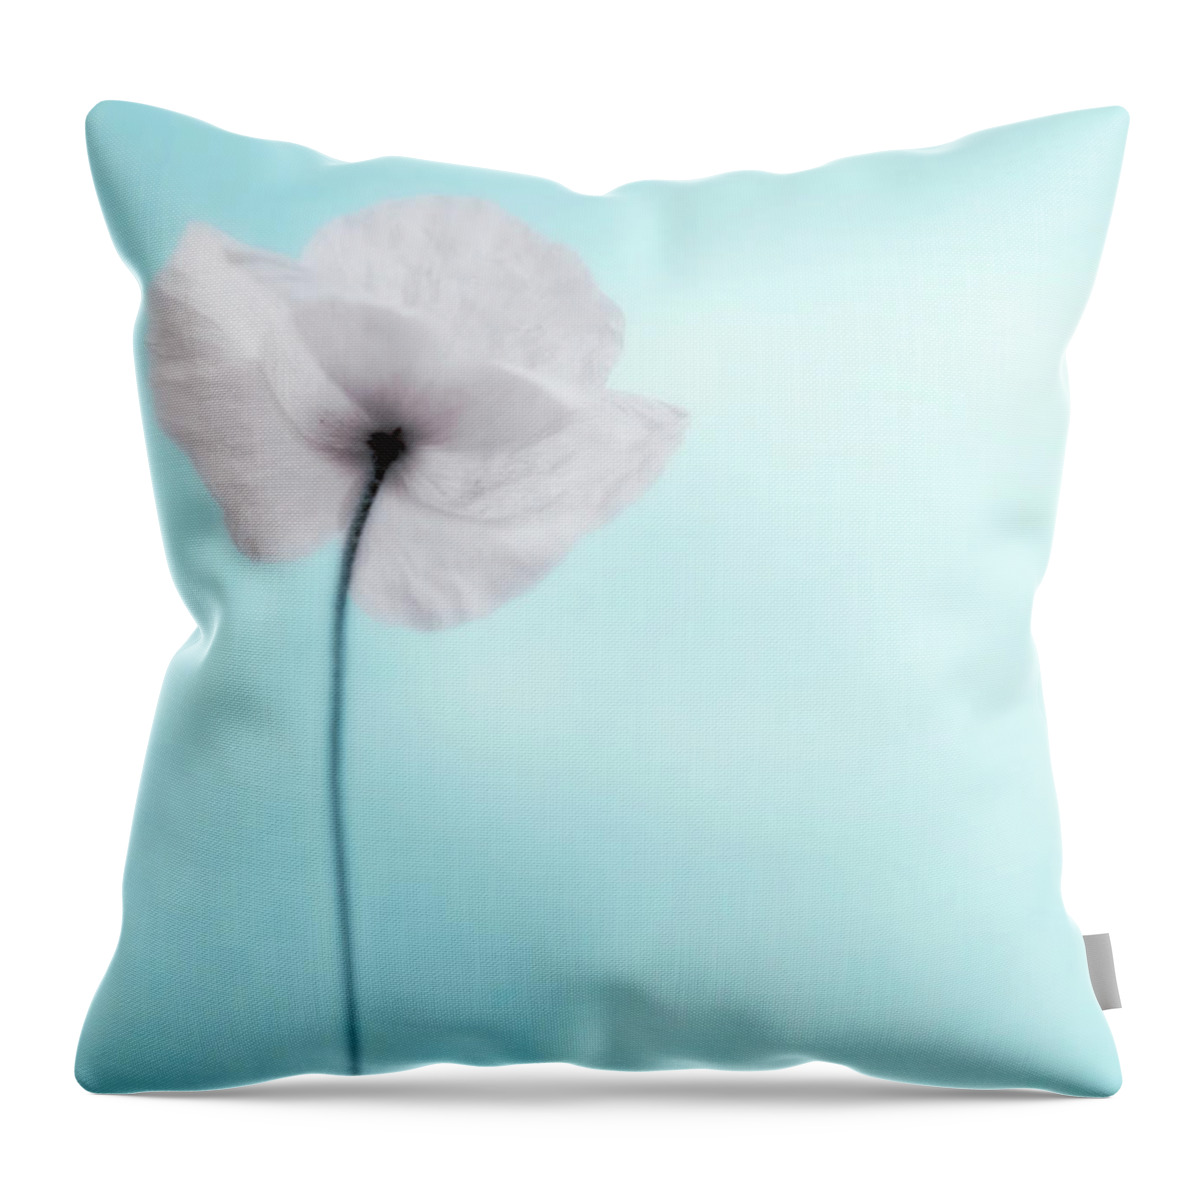 Desaturated Throw Pillow featuring the photograph A Poppy Against A Cool Blue Background by Alexandre Fp